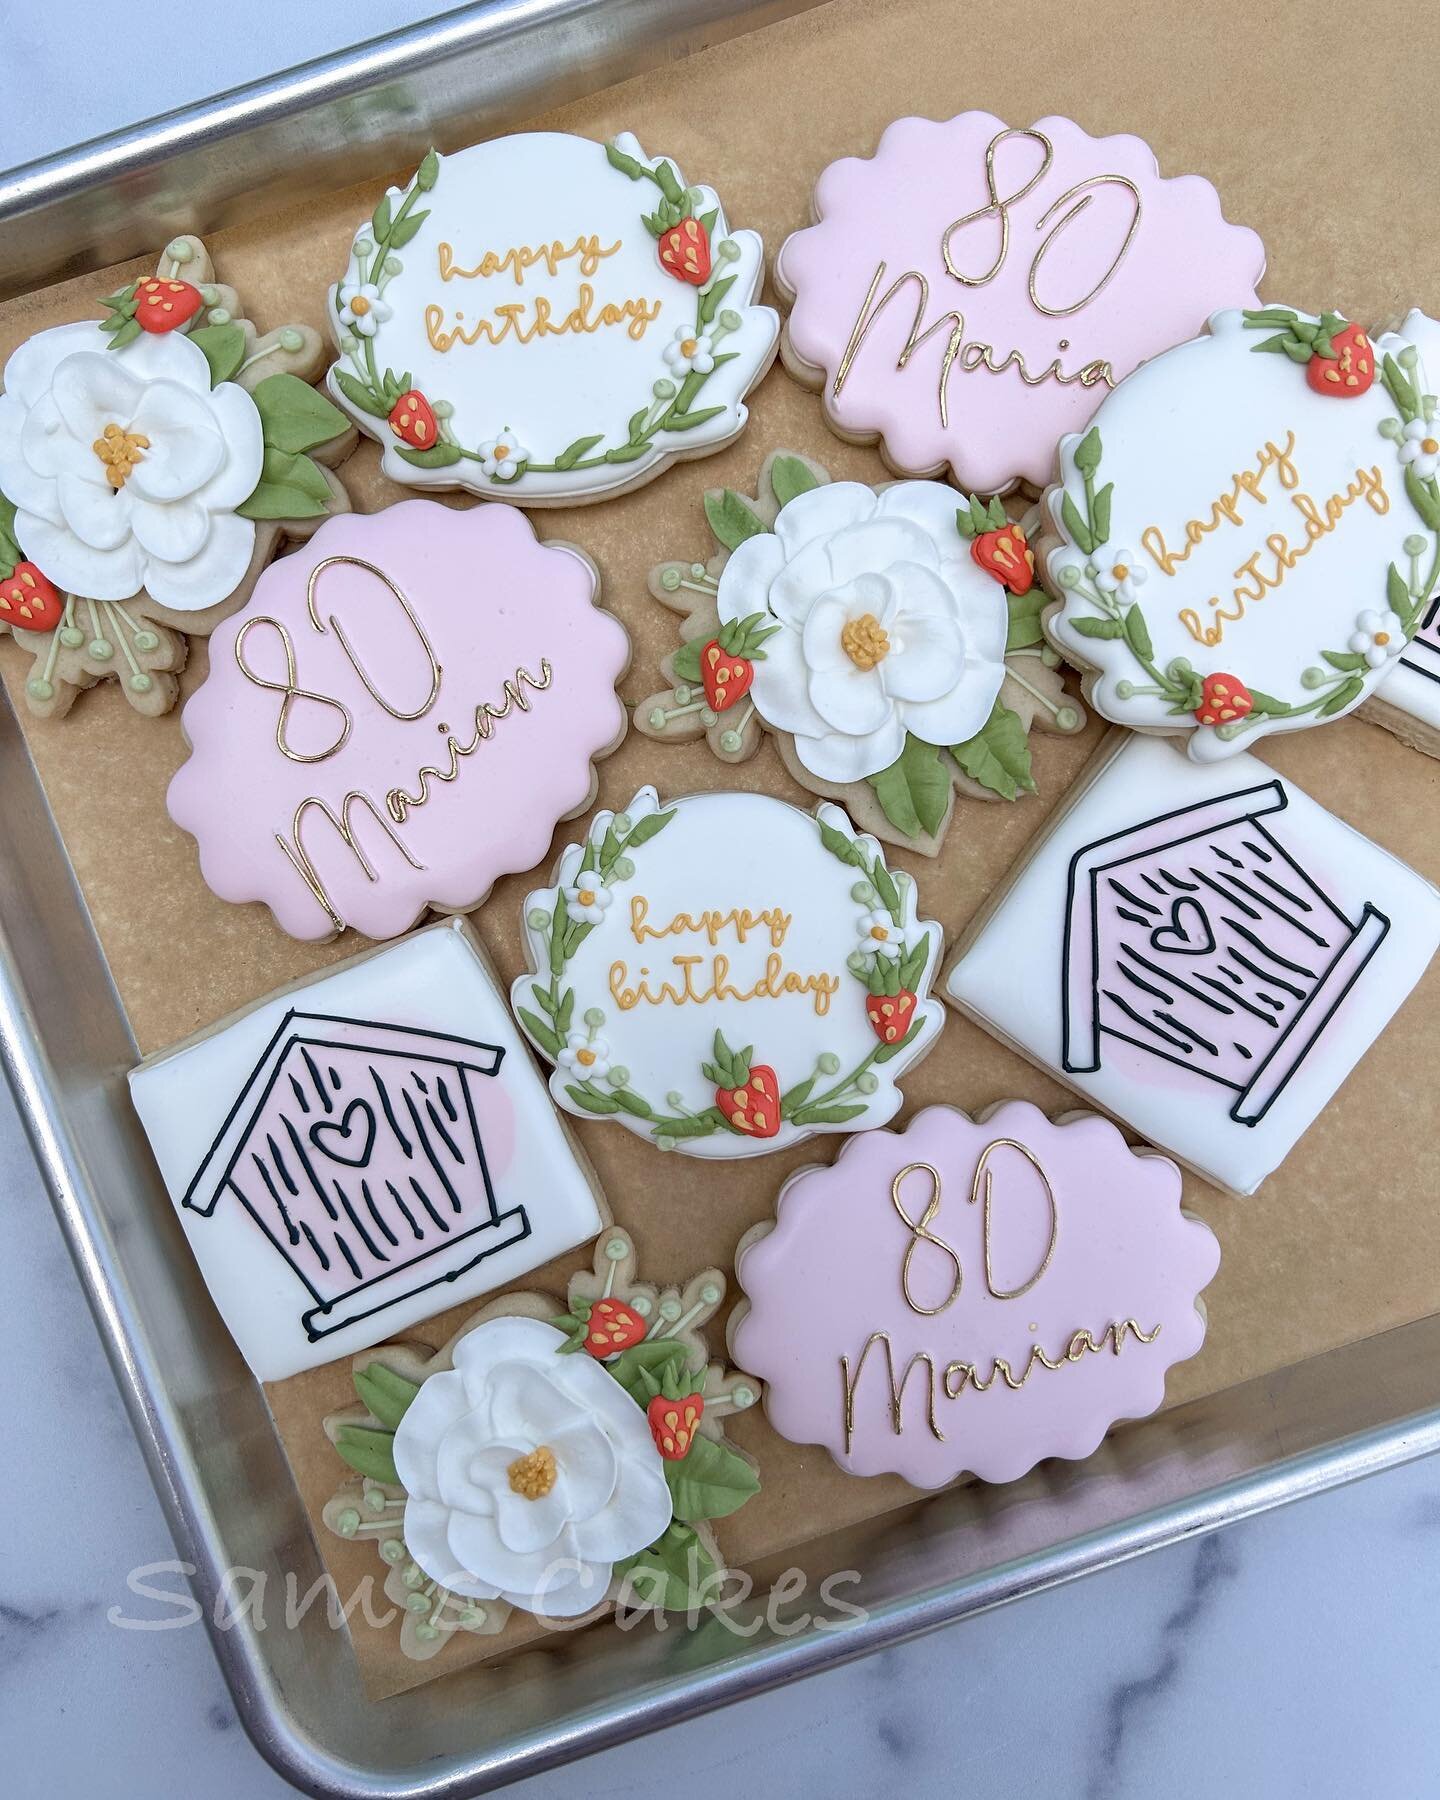 client: creative freedom; but my mom loves strawberries, daisies, and birds
me: sounds like fun! 
.
.
#samscakes #eighty #birthday #daisy #supportlocal #cookies #sugarcookies #cookiesofinstagram #buffalo